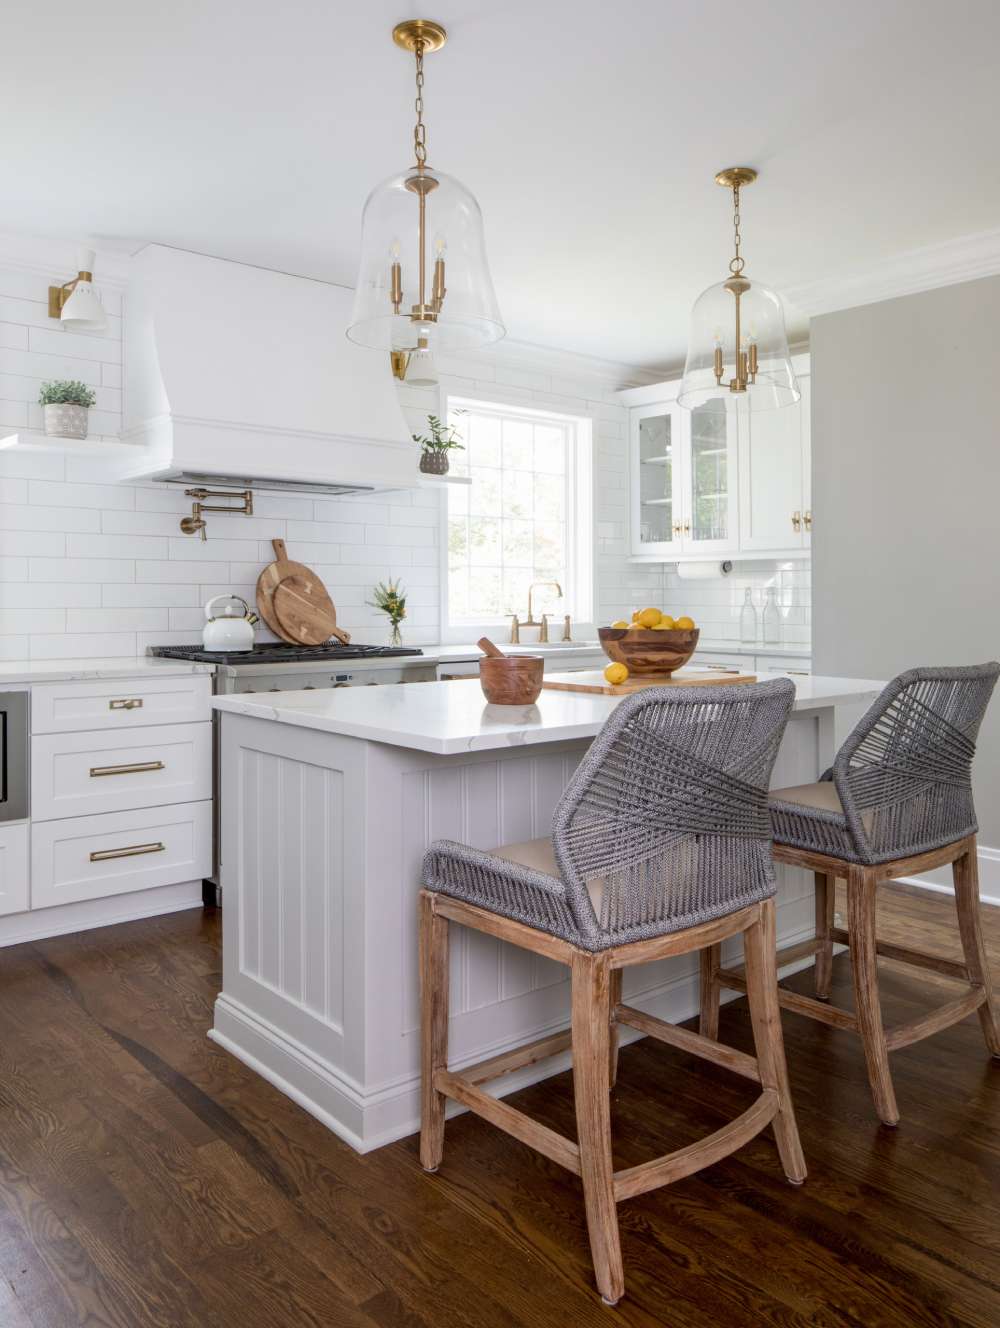 white cabinets with gold hardware